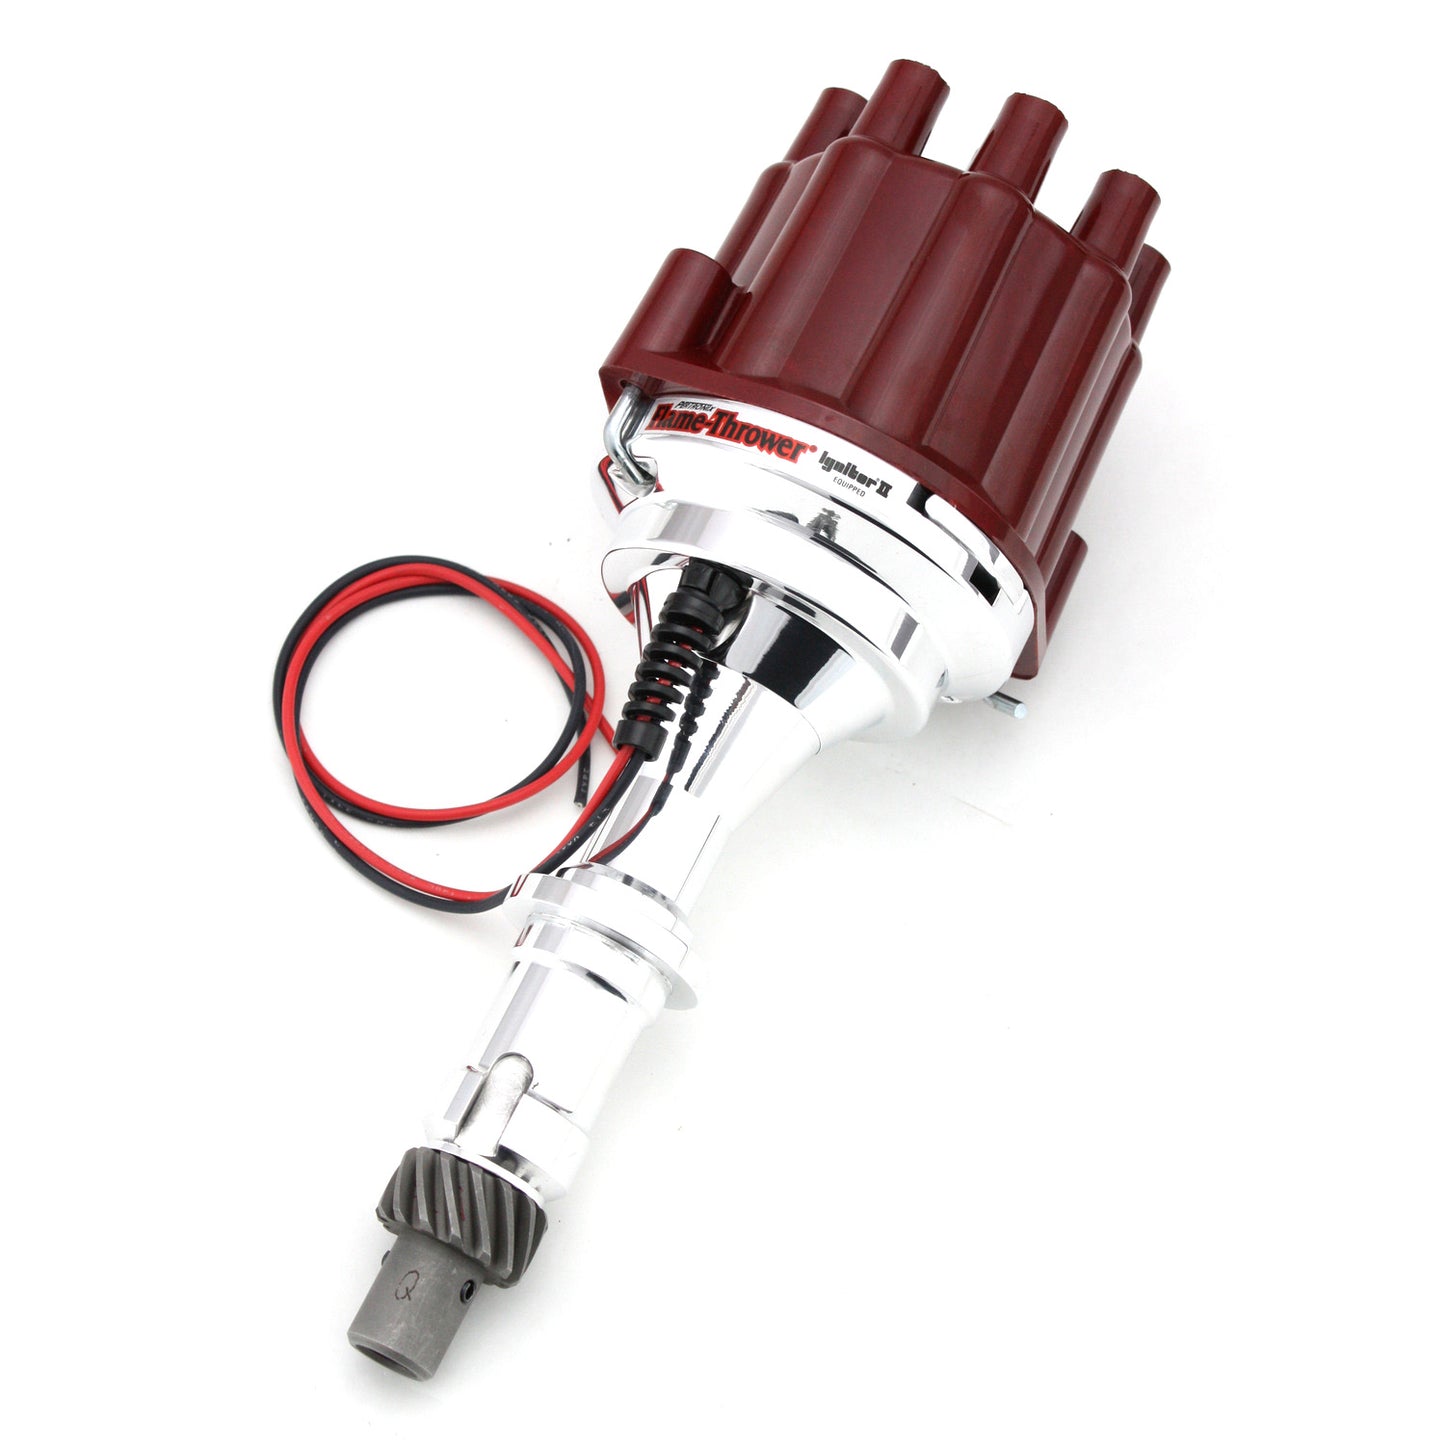 PerTronix D120801 Flame-Thrower Electronic Distributor Billet Pontiac V8 Plug and Play with Ignitor II Technology Non Vacuum Advance Red Cap